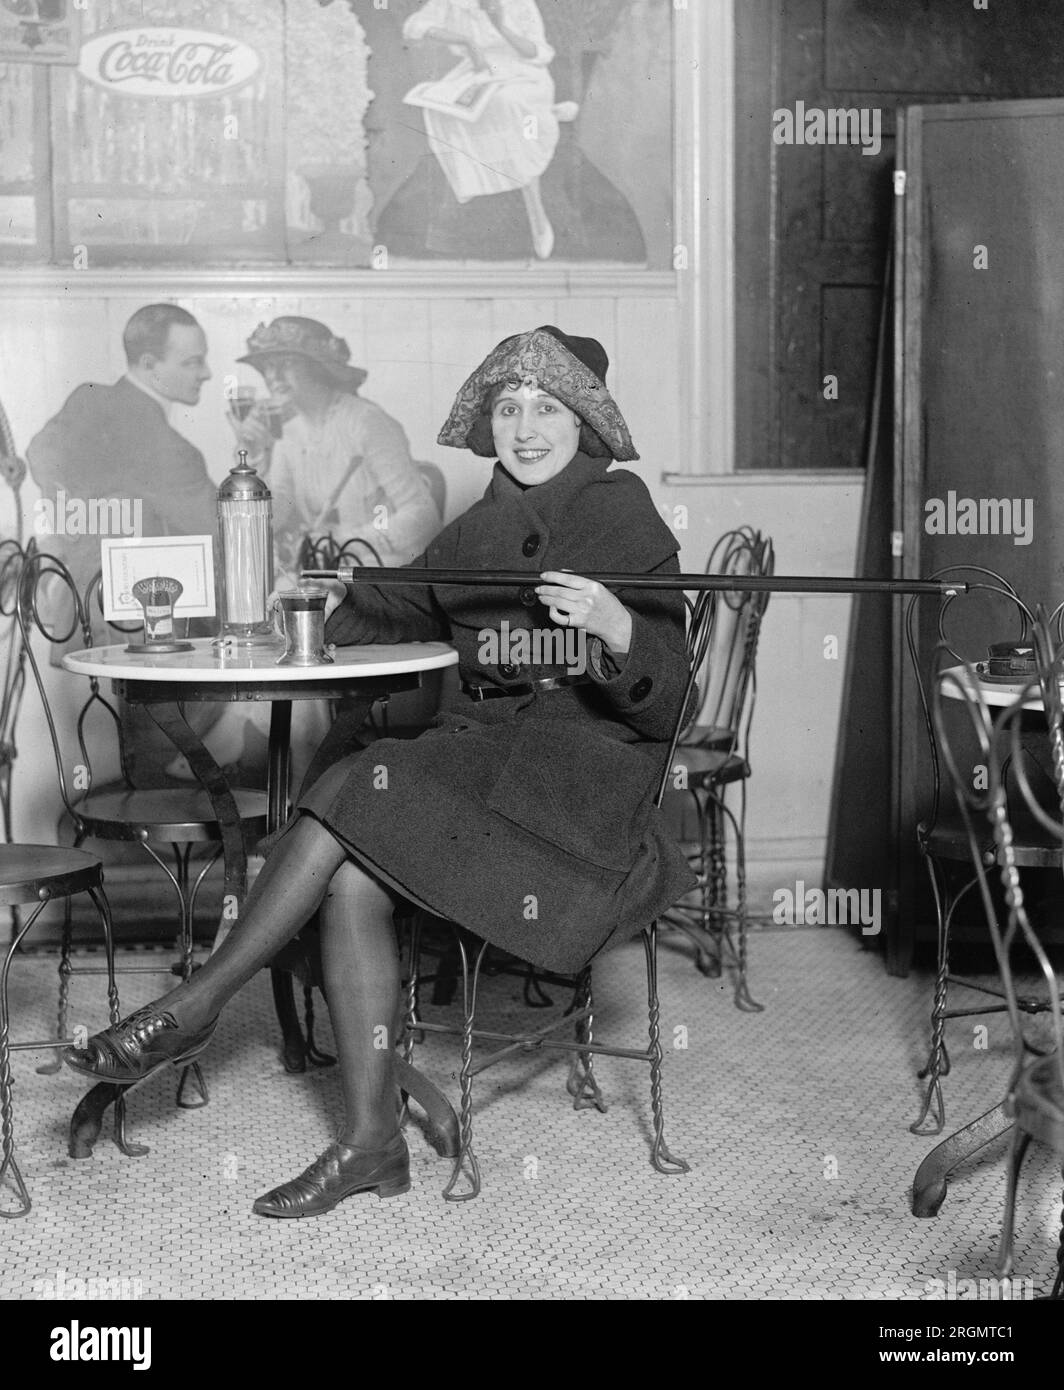 Woman seated at a soda fountain table is pouring alcohol into a cup from a cane, during Prohibition; with a large Coca-Cola advertisement on the wall ca. 1922 Stock Photo